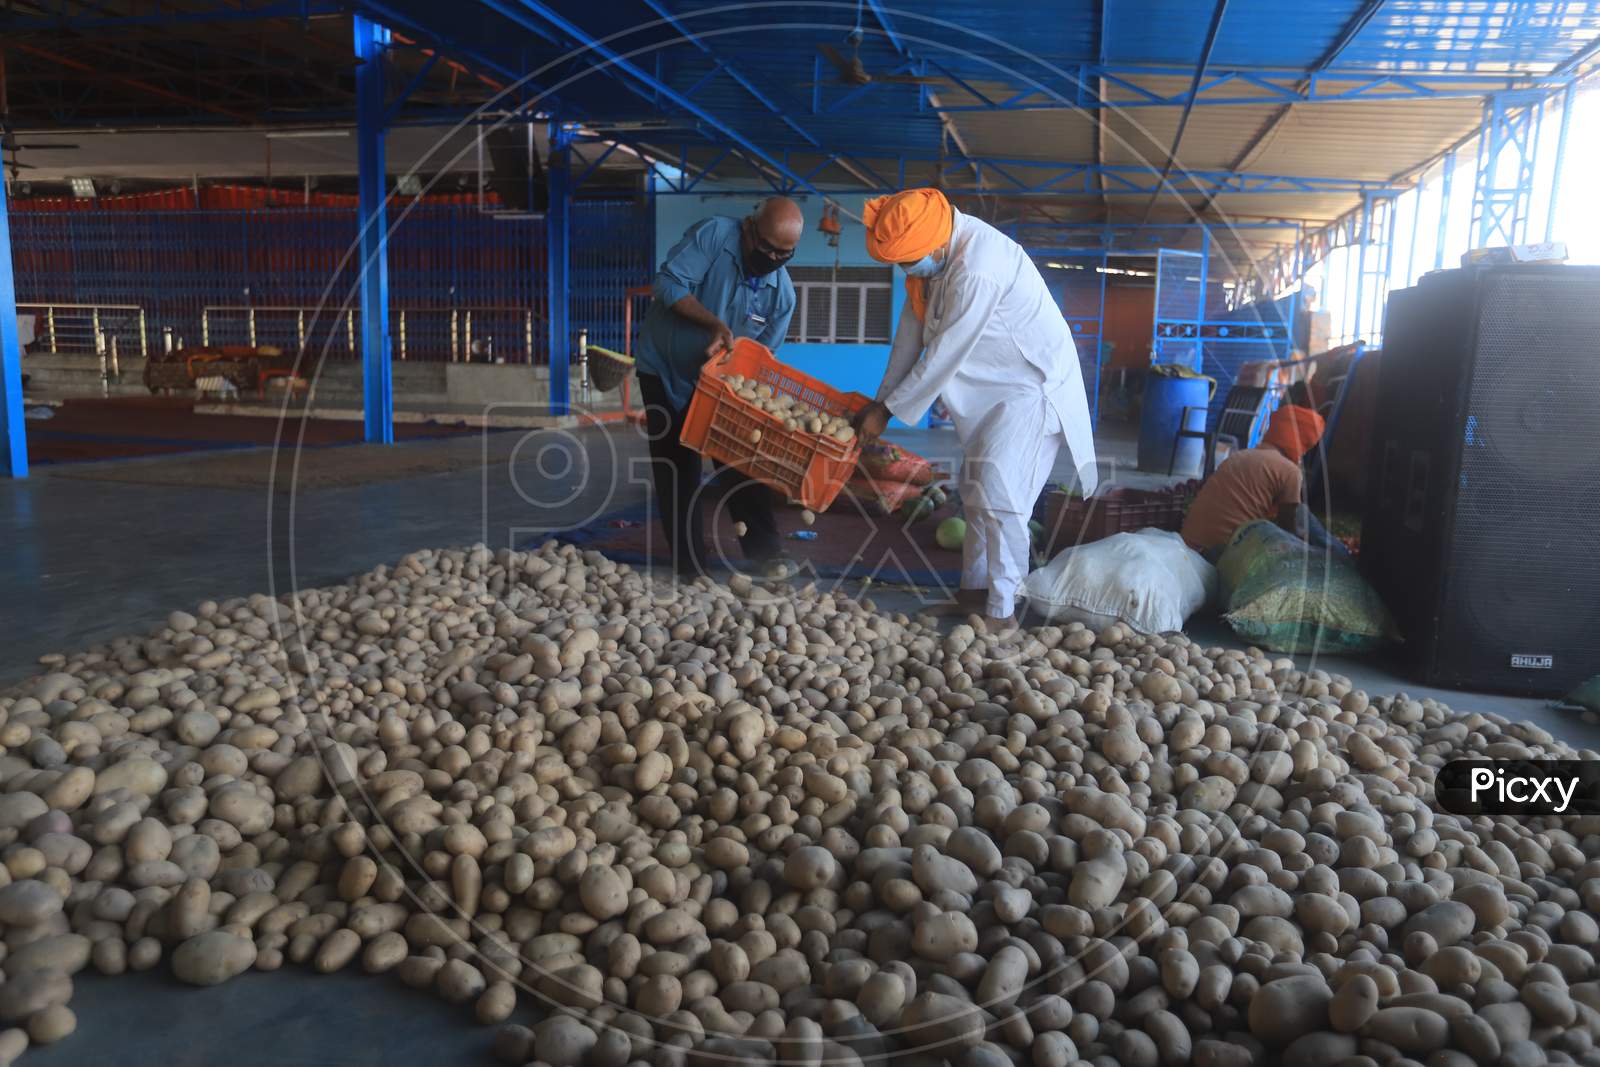 Social worker carry potatoes for food preparation of langar during a 21-day nationwide lockdown to limit the spreading of coronavirus disease (COVID-19), Prayagraj, April 3, 2020.